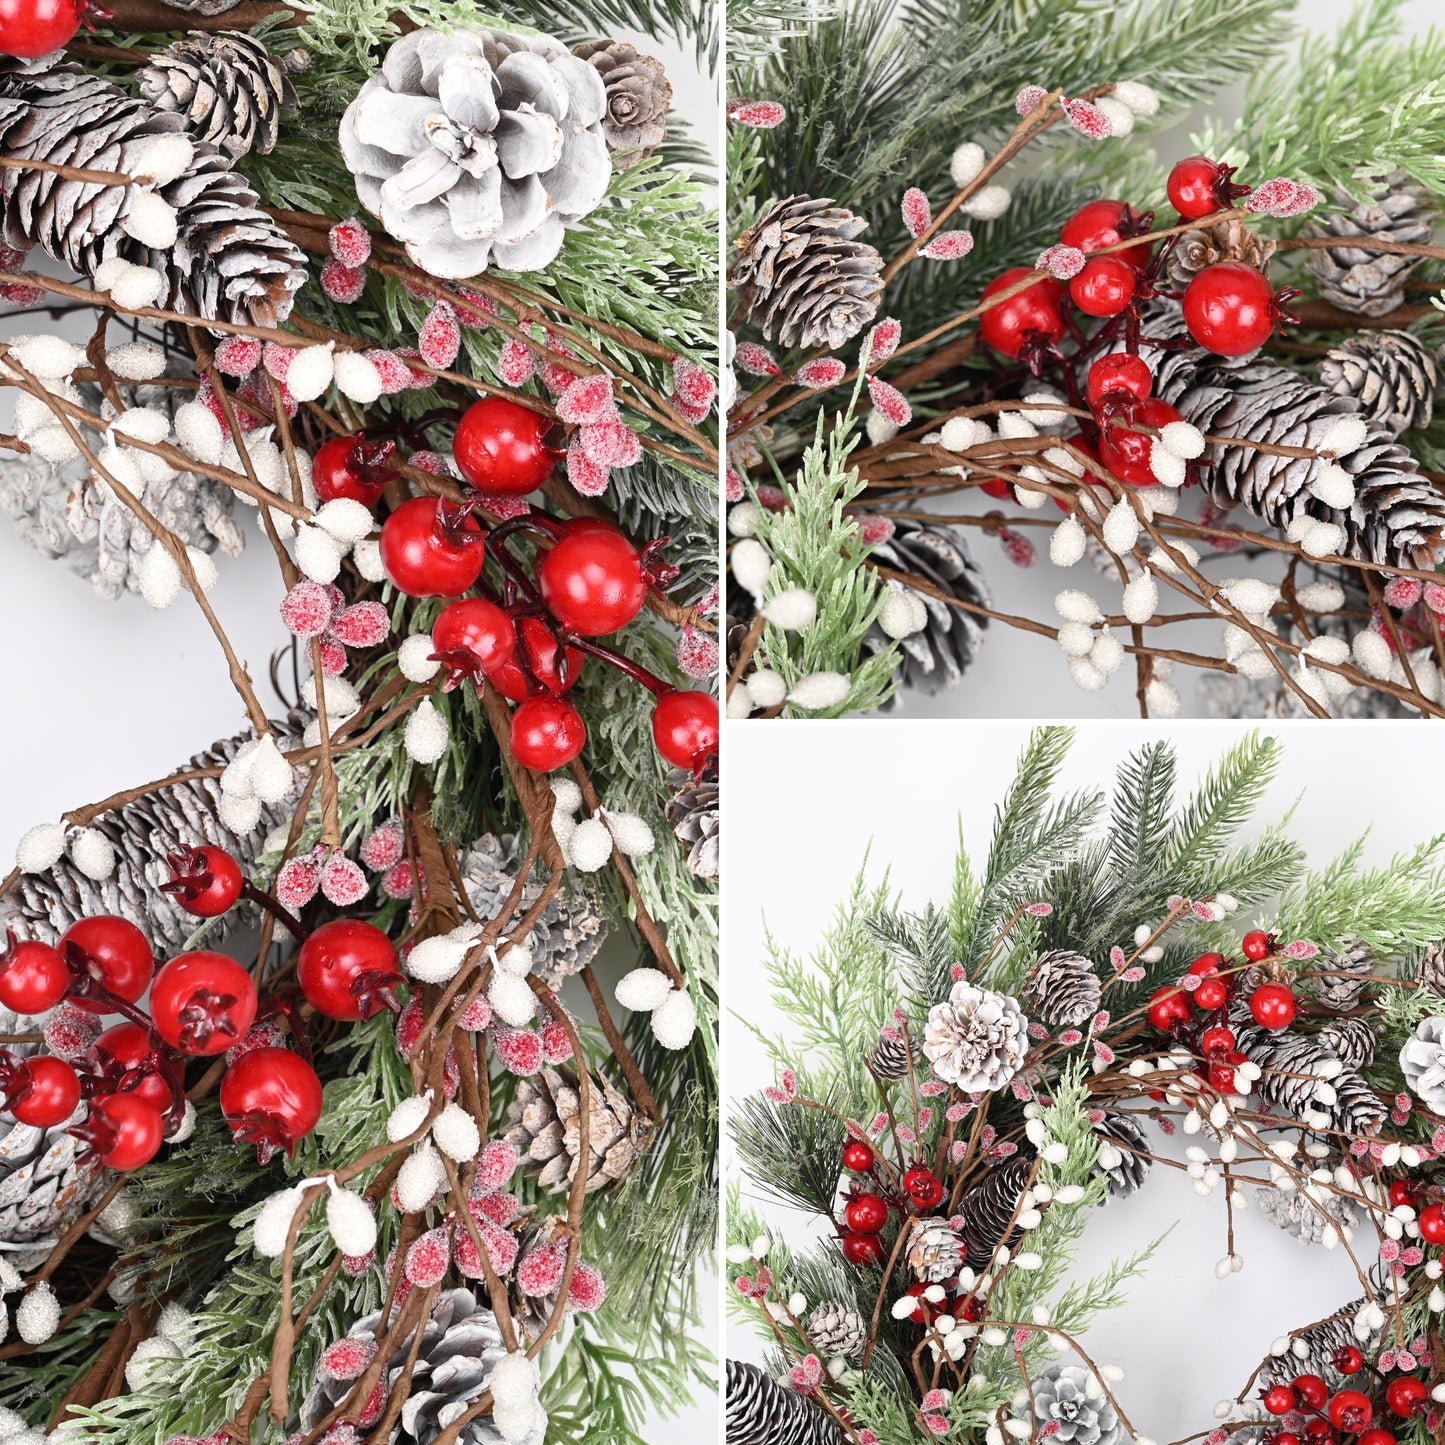 Christmas Wreath for Front Door, 24 inch Winter Wreaths with Natural Pine Cones, Red Berries,Spruce Branches